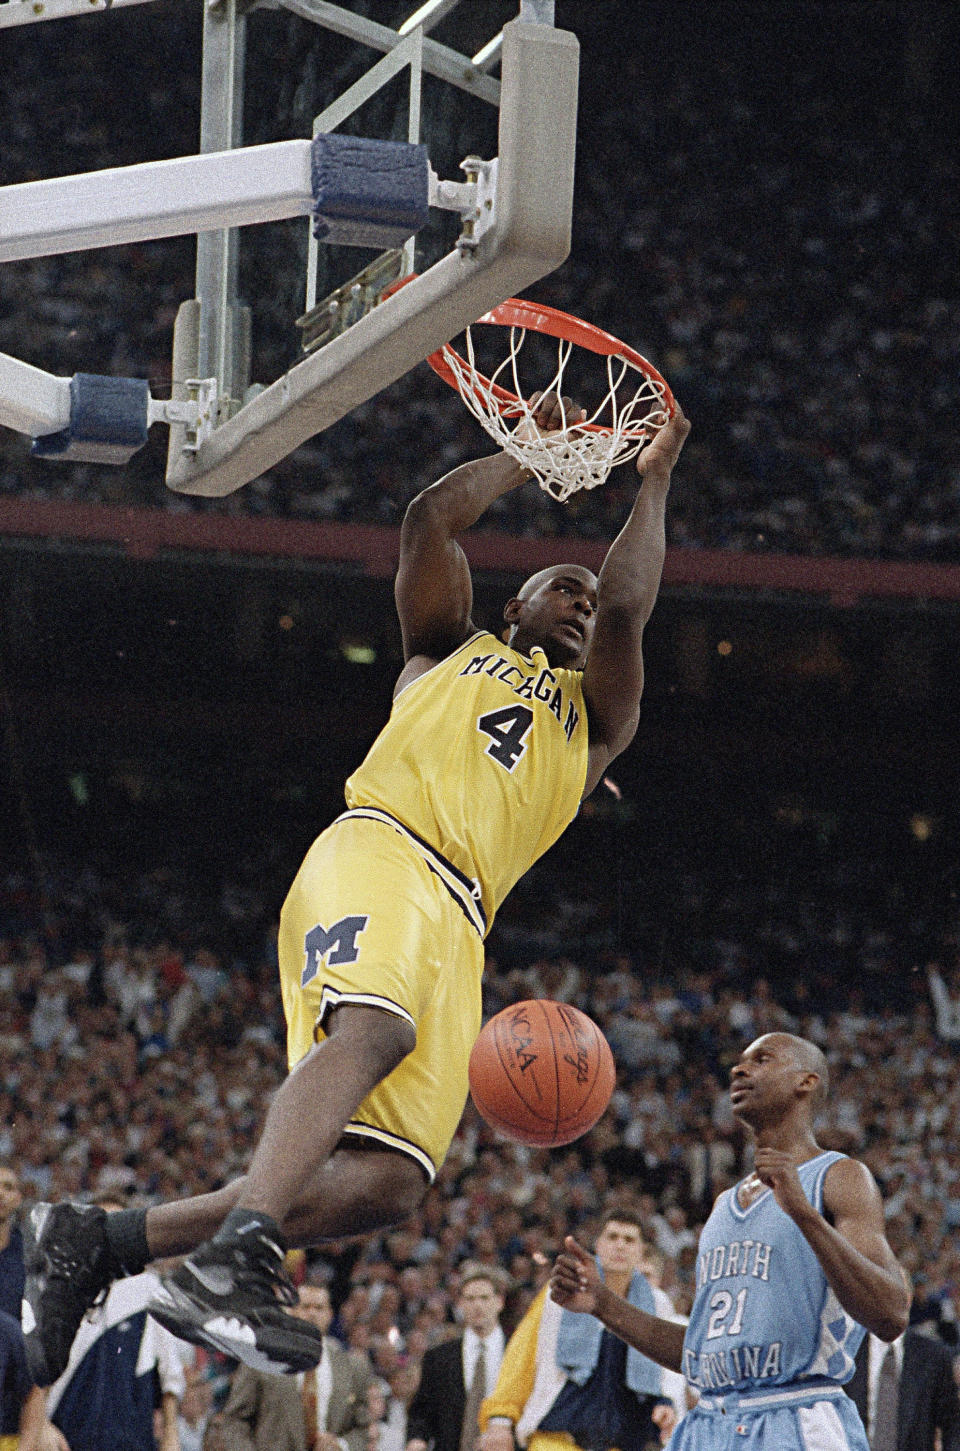 FILE - In this April 5, 1993, file photo, Michigan's Chris Webber hangs from the rim after dunking the ball during the NCAA Final Four championship game against North Carolina at the Superdome in New Orleans. North Carolina defeated Michigan, 77-71. (AP Photo/Ed Reinke, File)